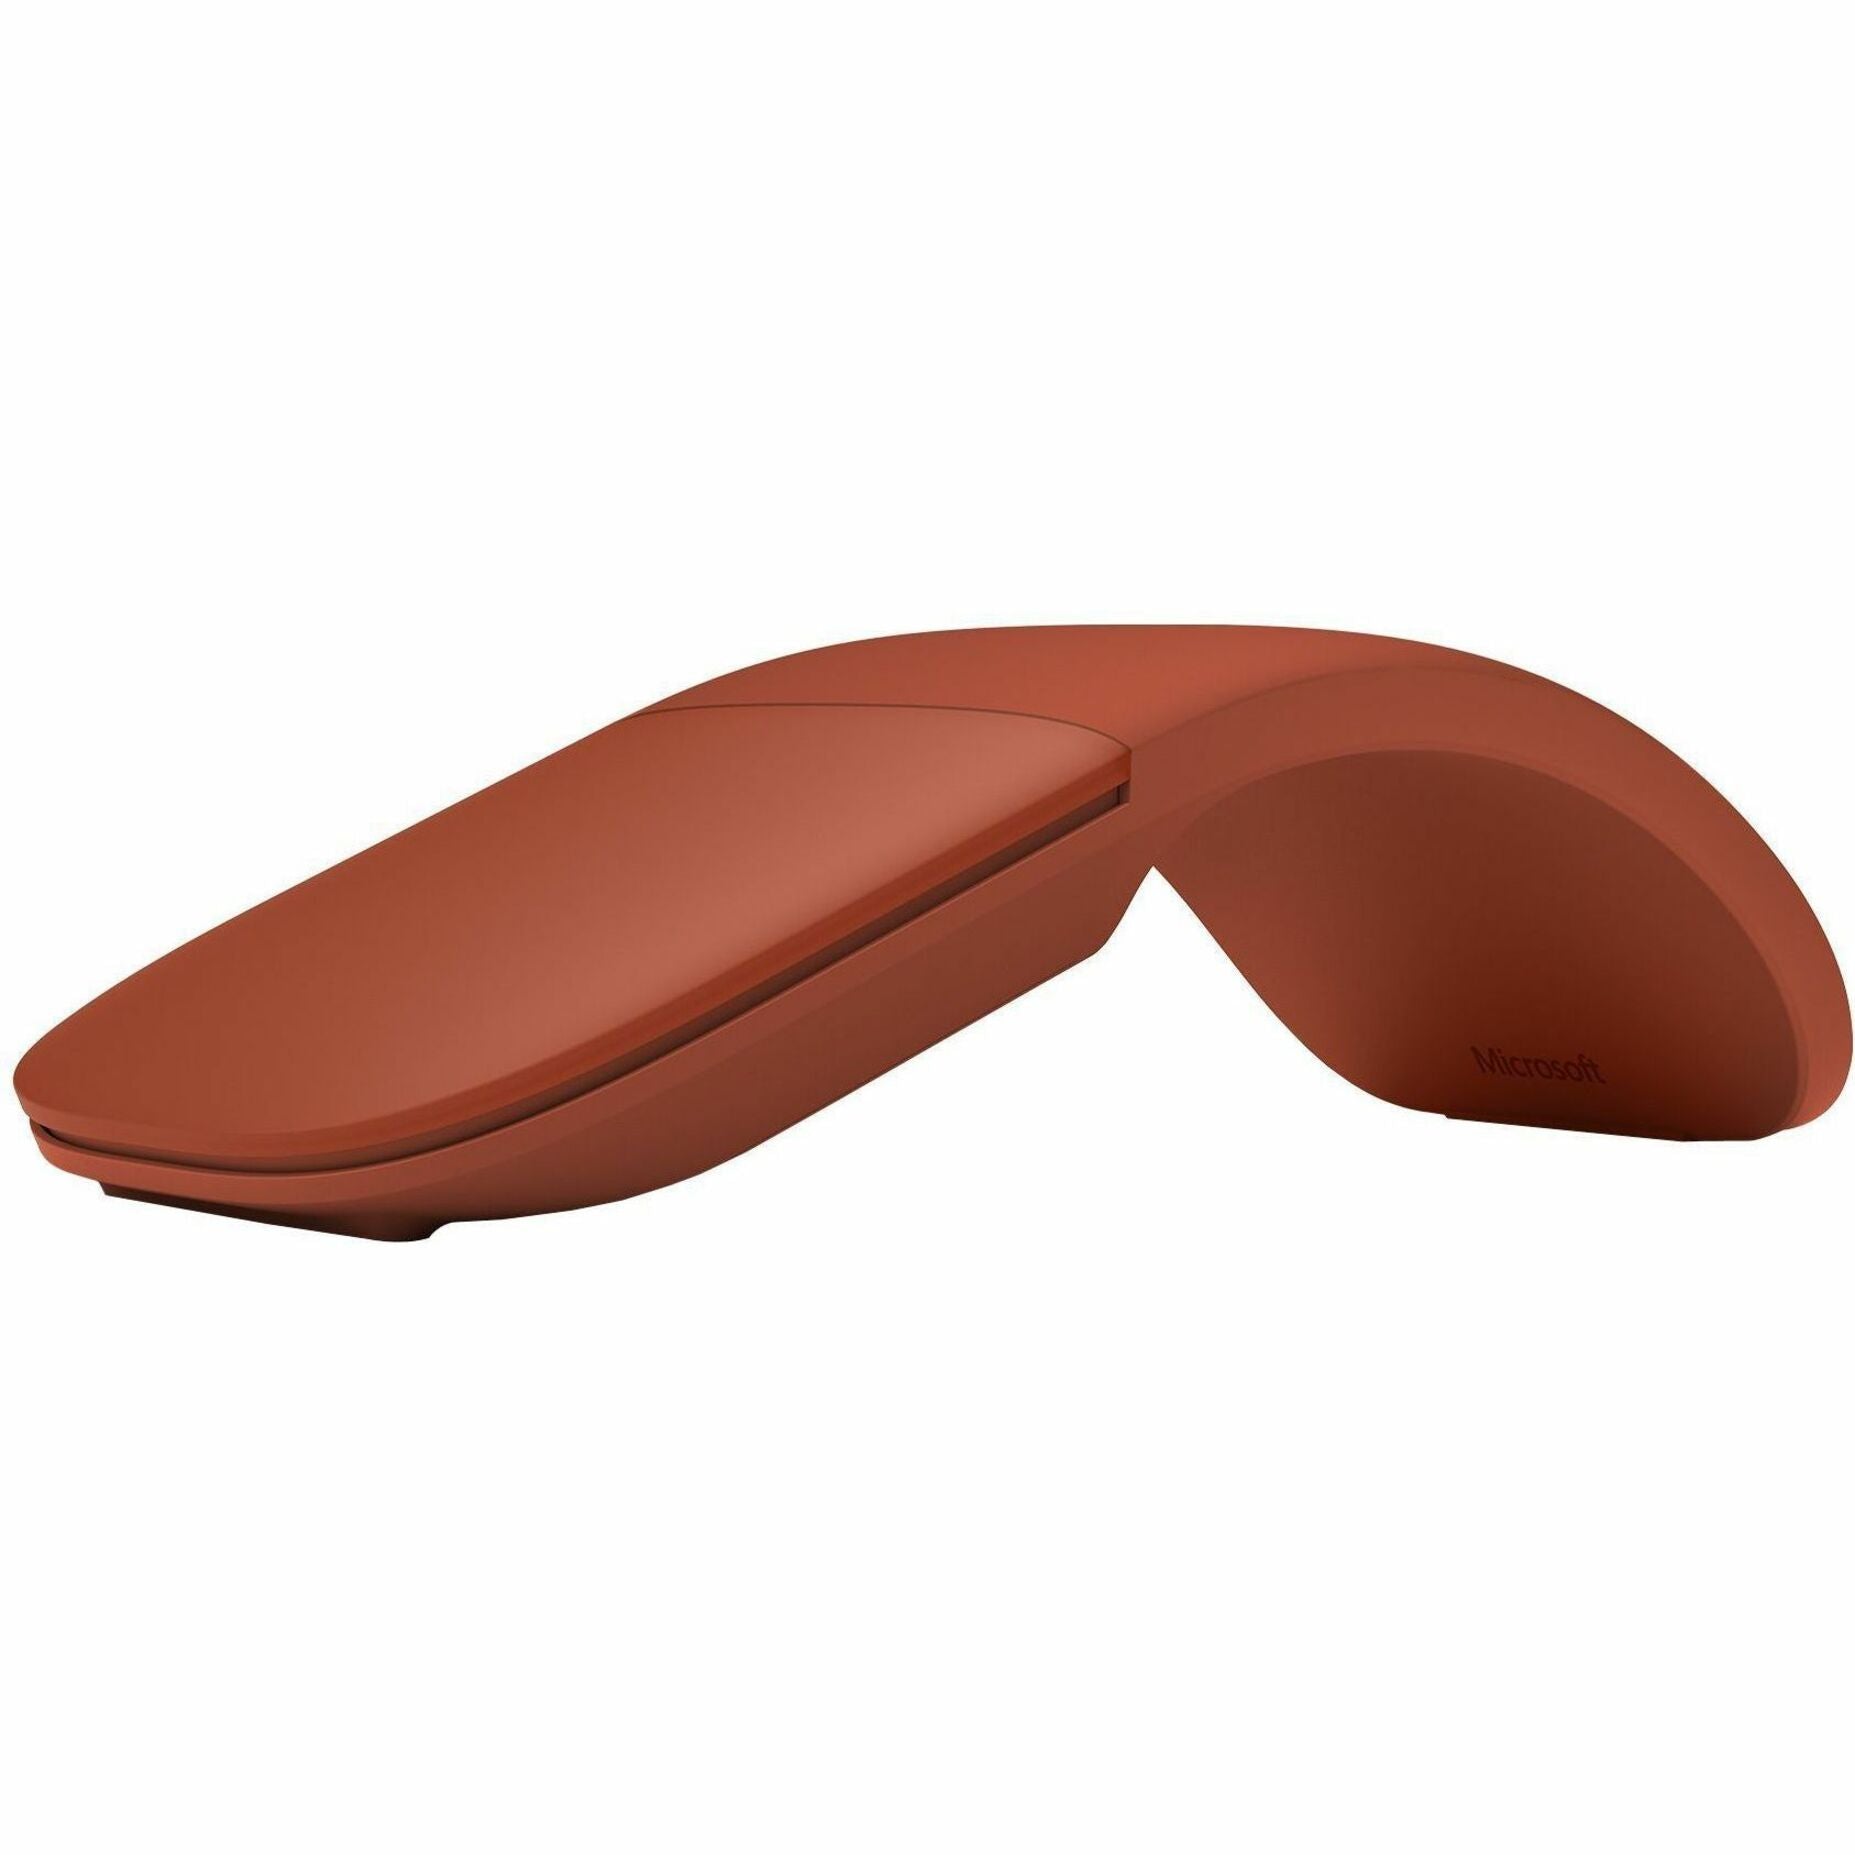 Microsoft FHD-00072 Surface Arc Mouse, Poppy Red, Bluetooth Wireless Travel Pointing Device